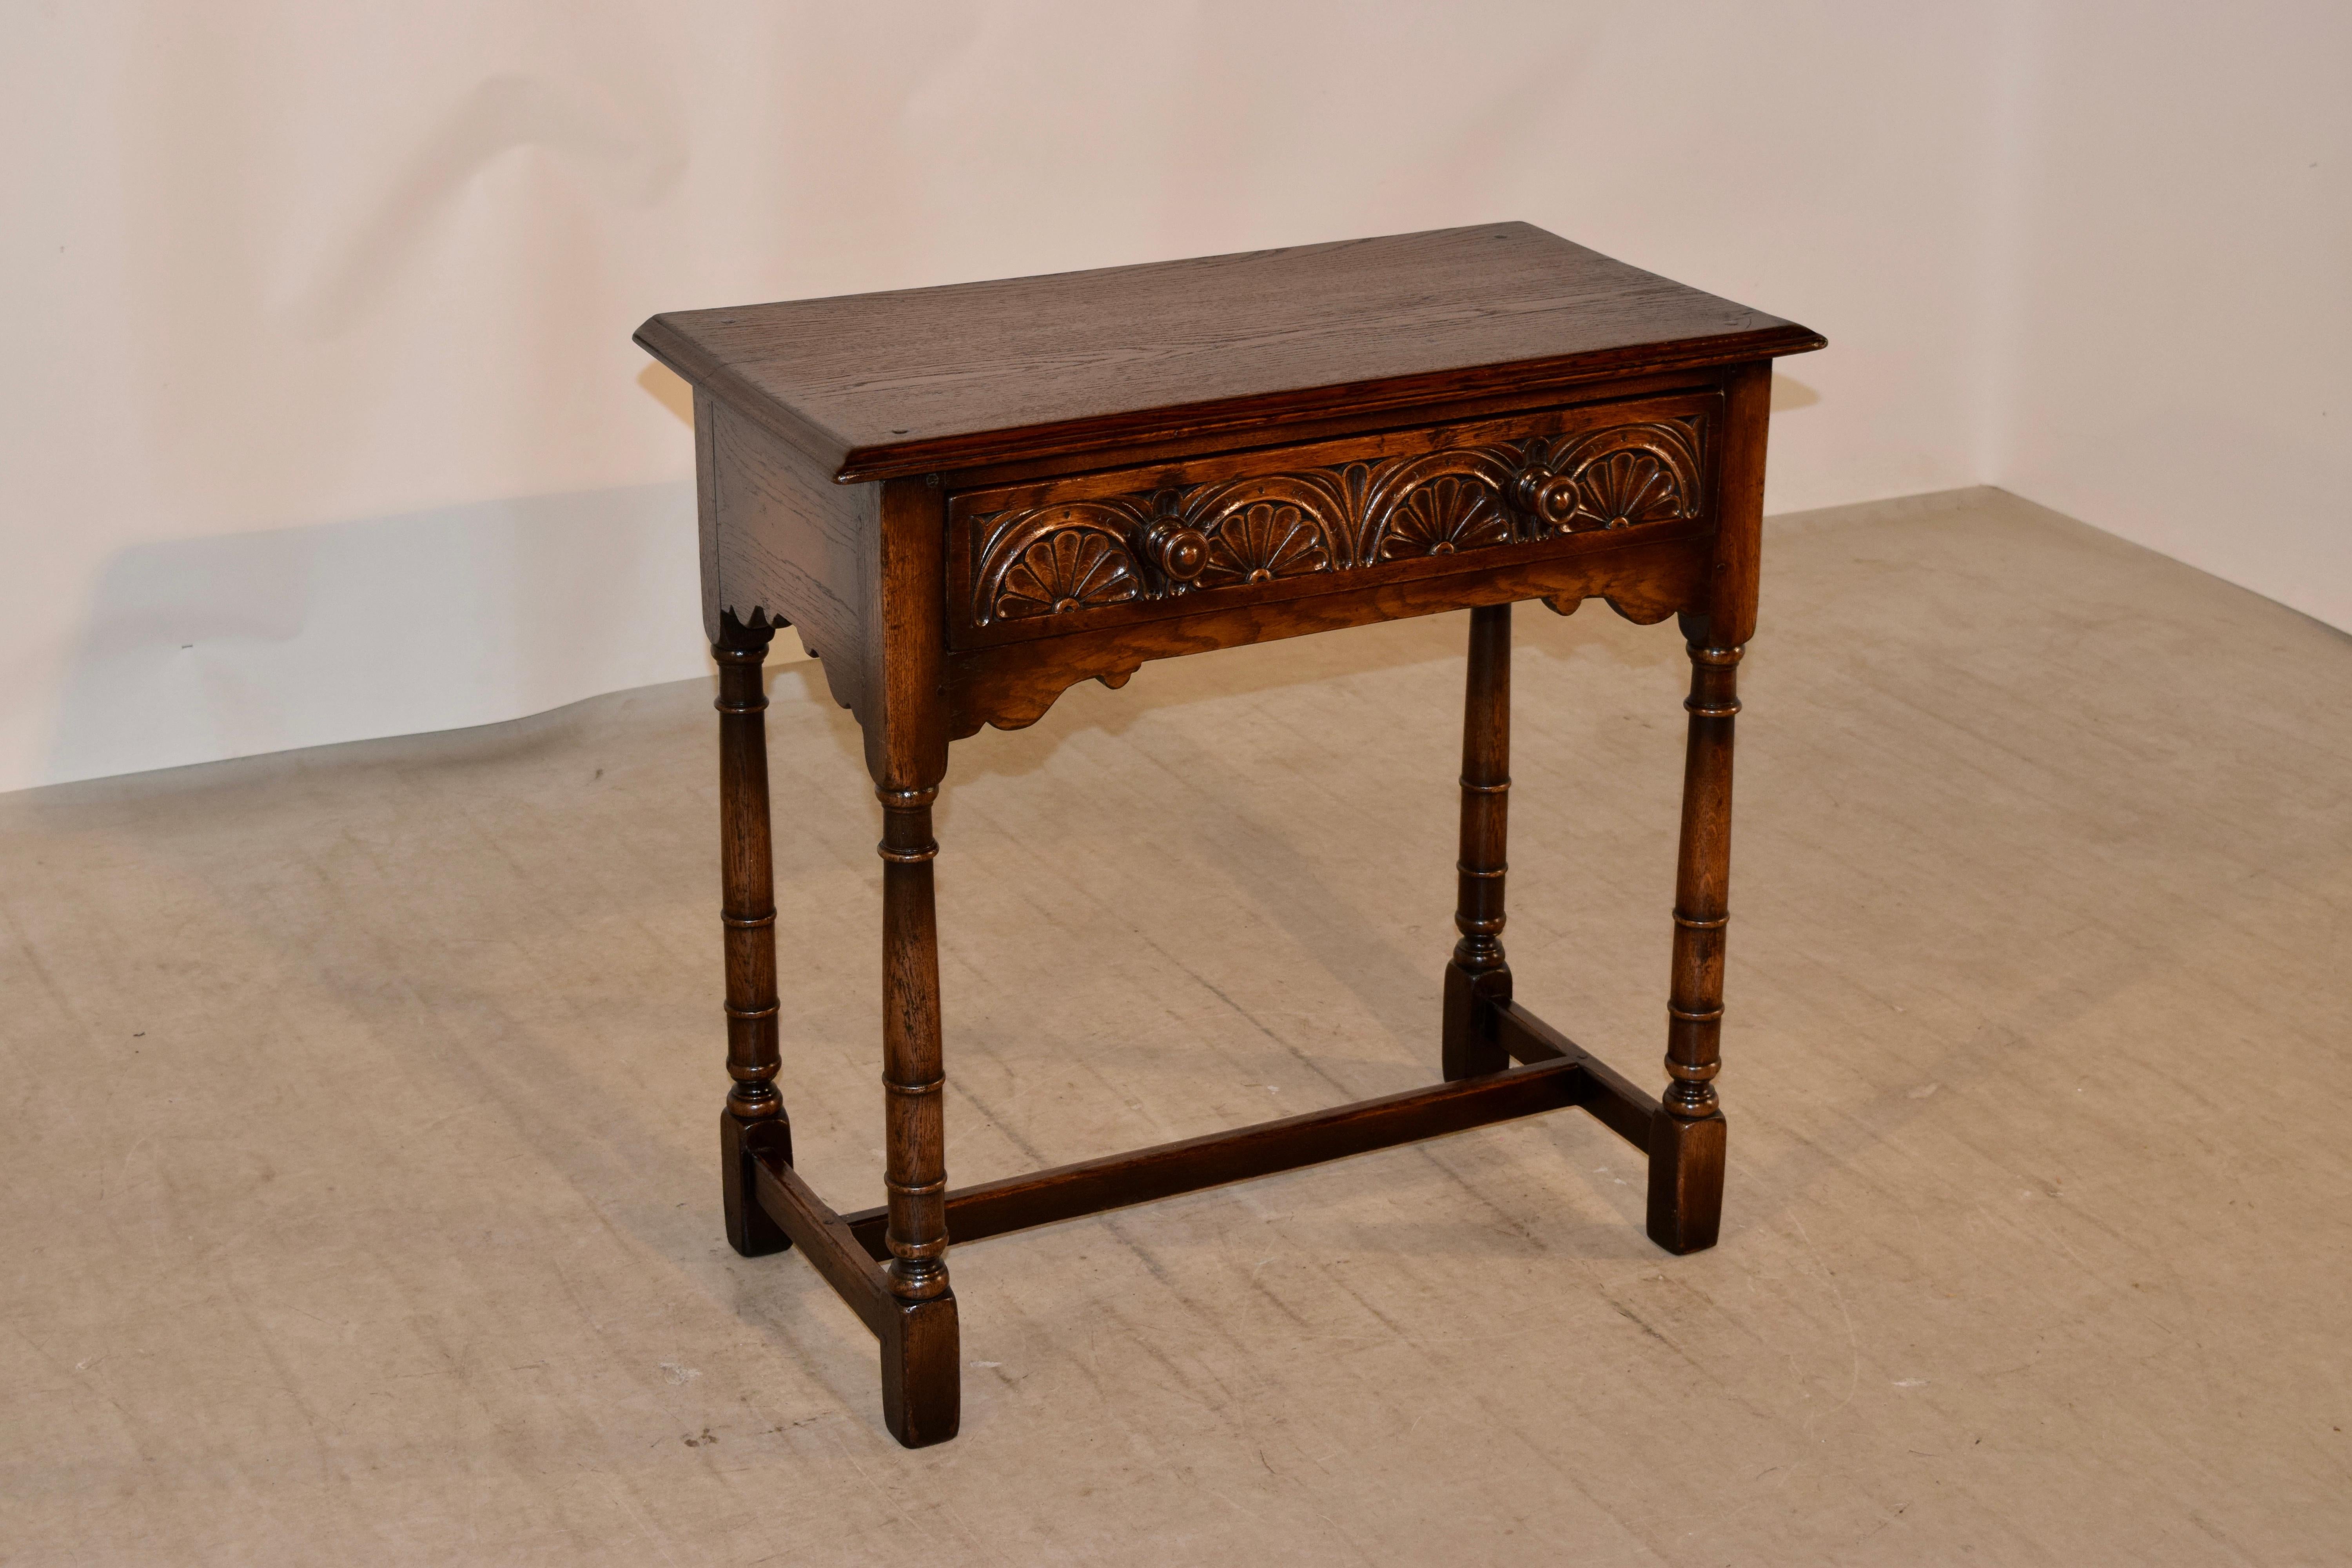 Late 19th century oak side table from England with a beveled edge around the top, following down to simple sides with wonderfully hand scalloped aprons and a single drawer in the front with lovely hand carved decoration. Supported on hand turned